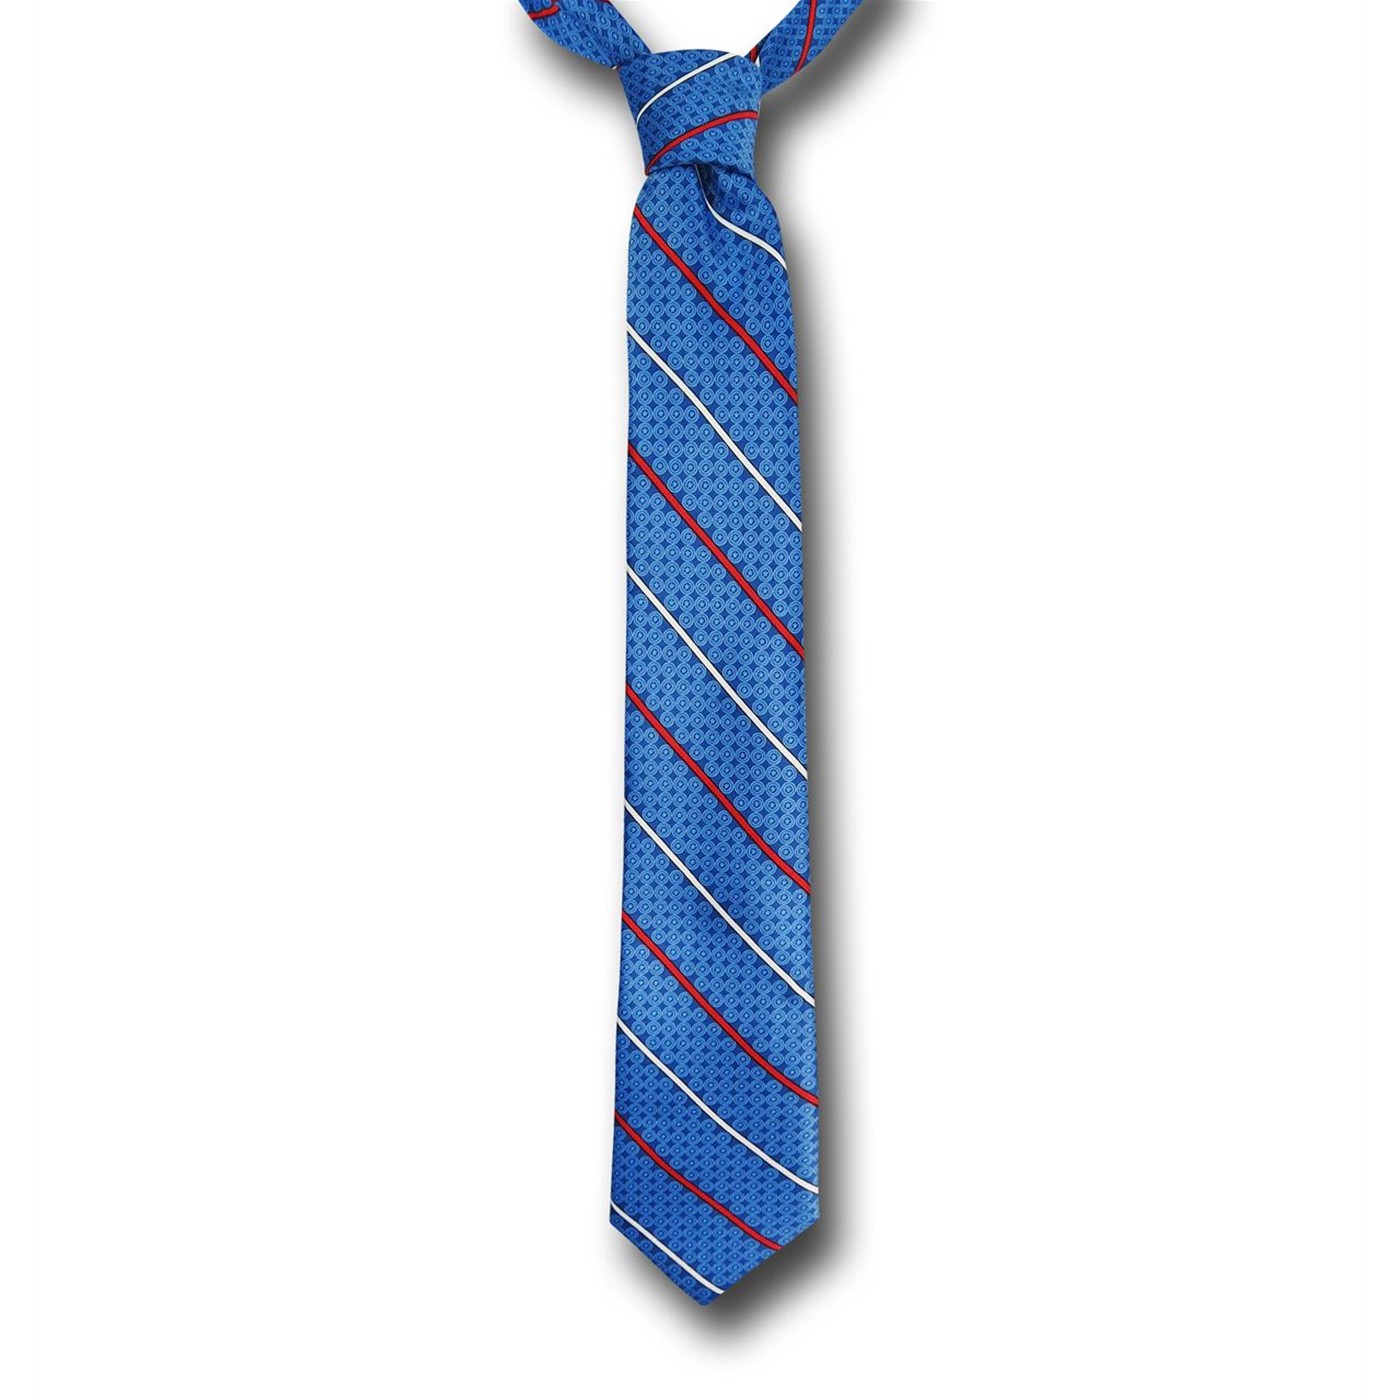 Captain America Red White and Blue Striped Tie